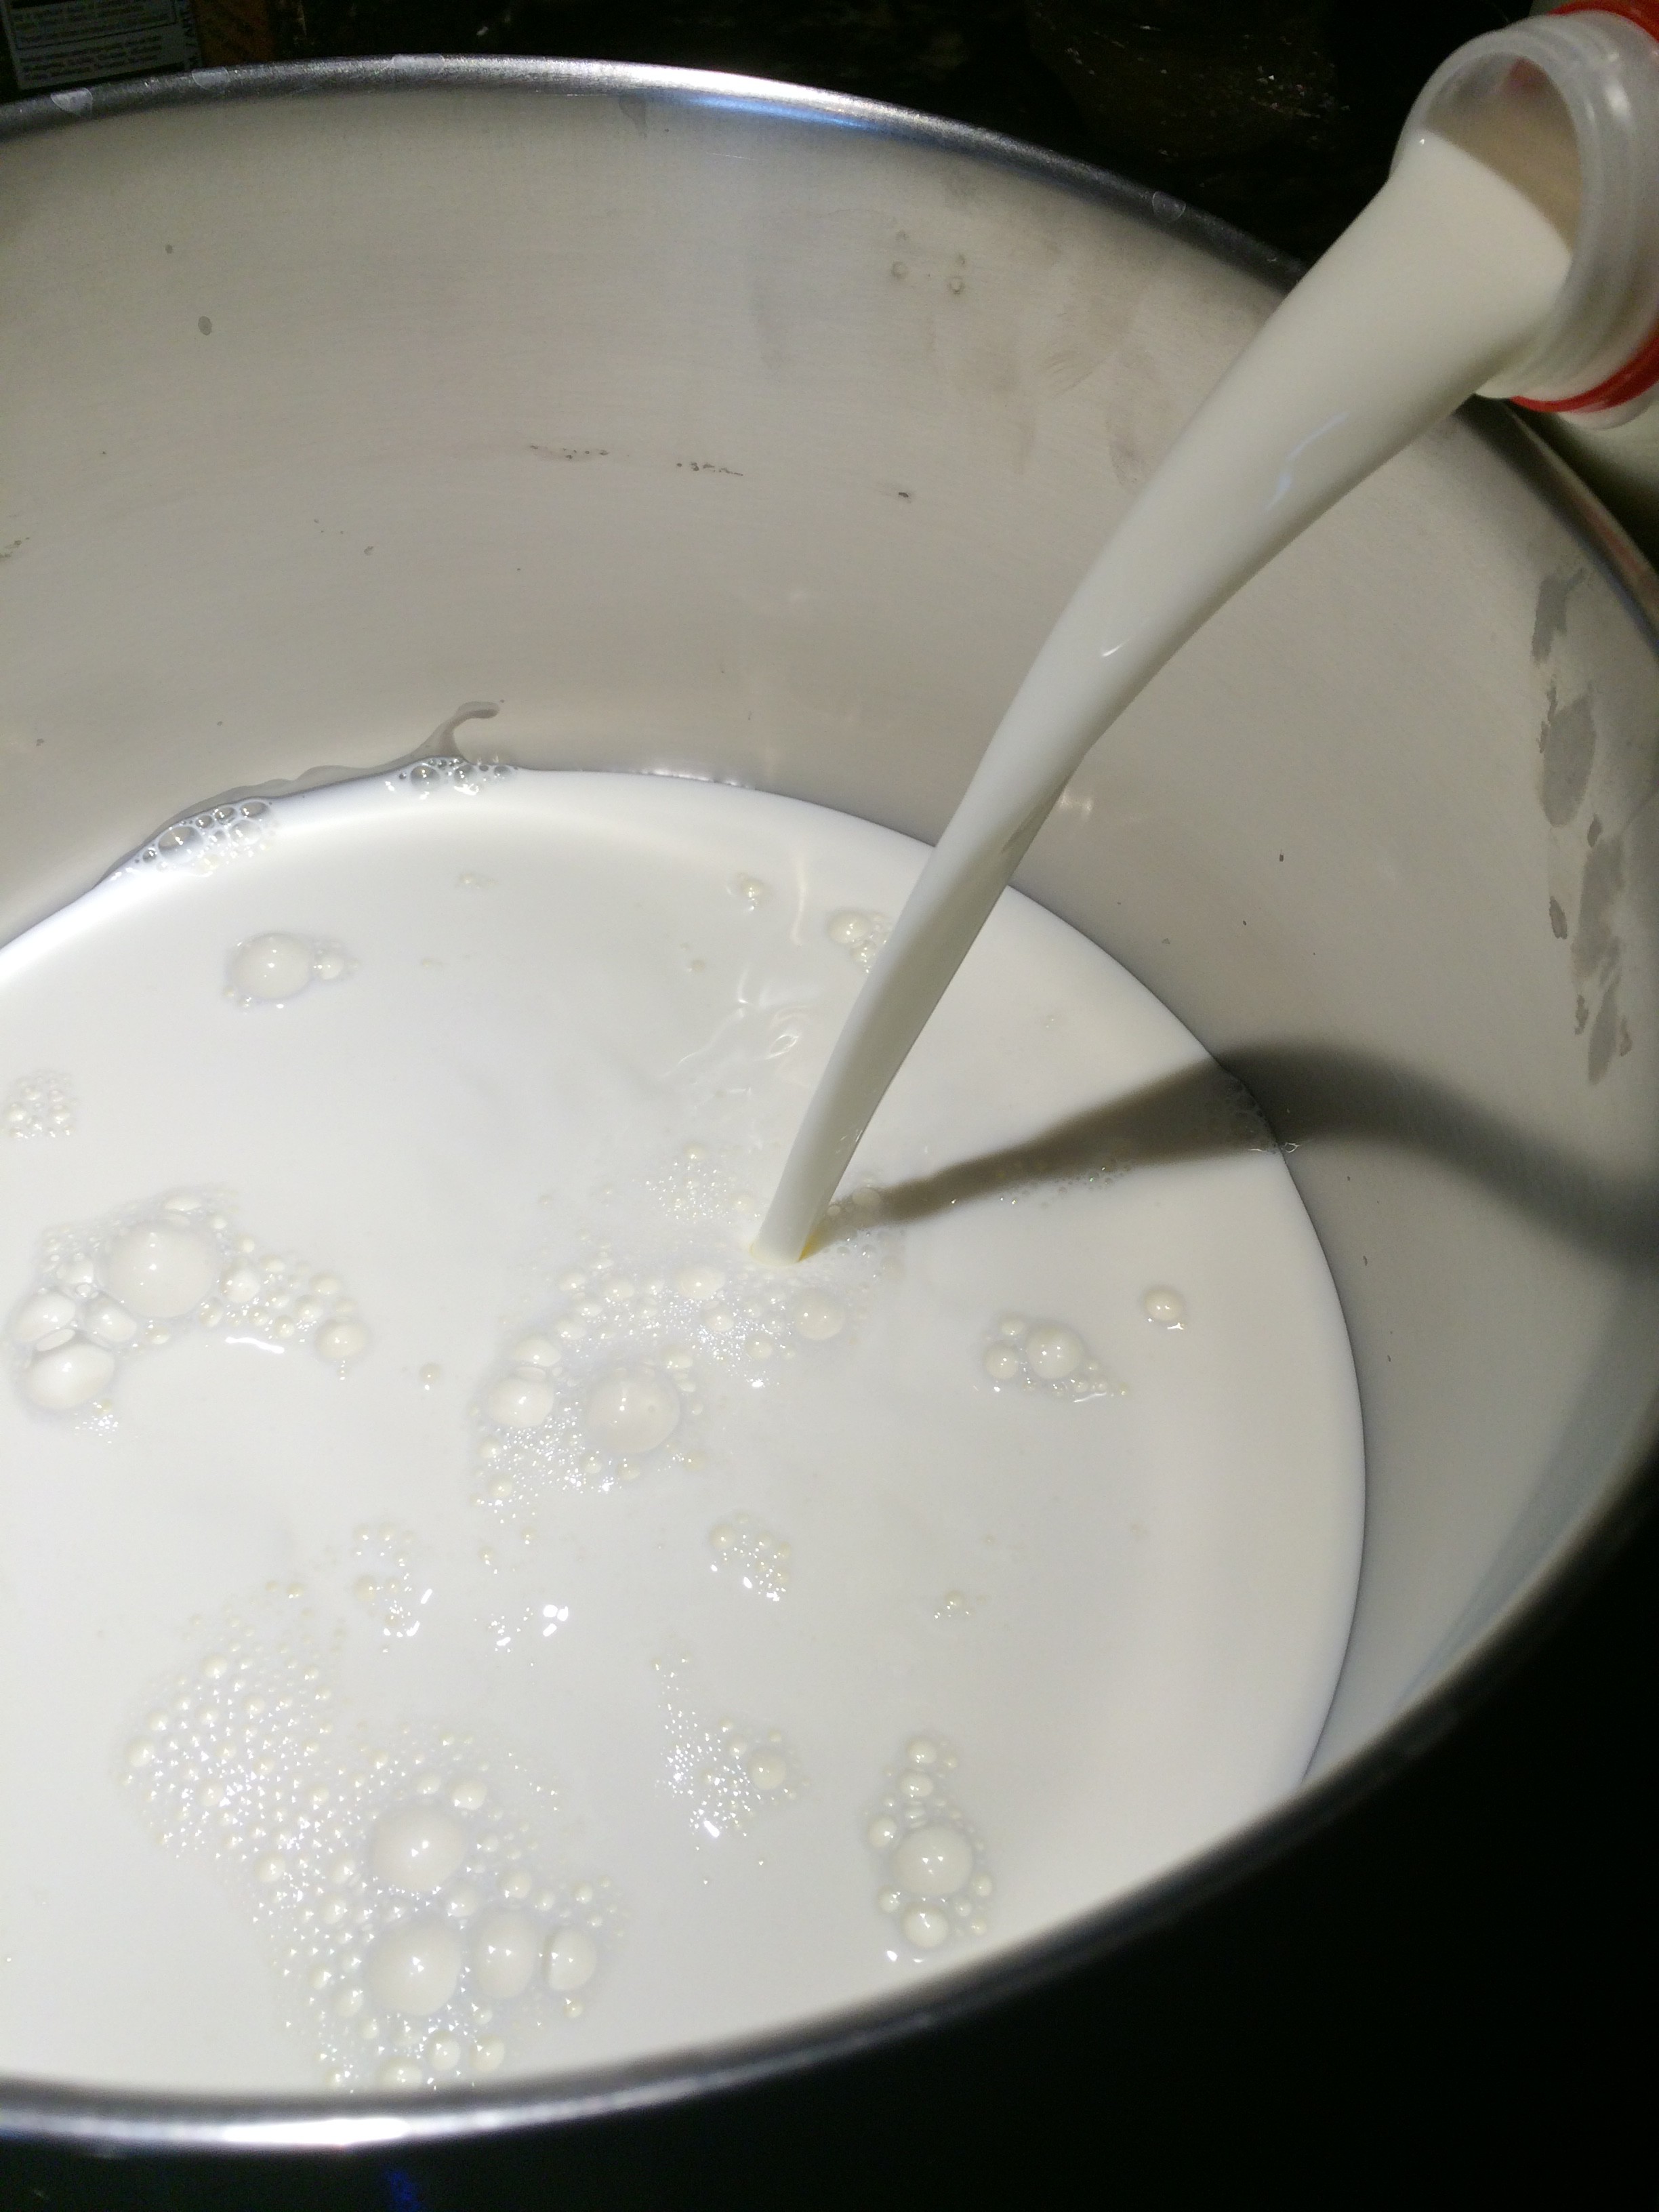 Milk being poured into a pot